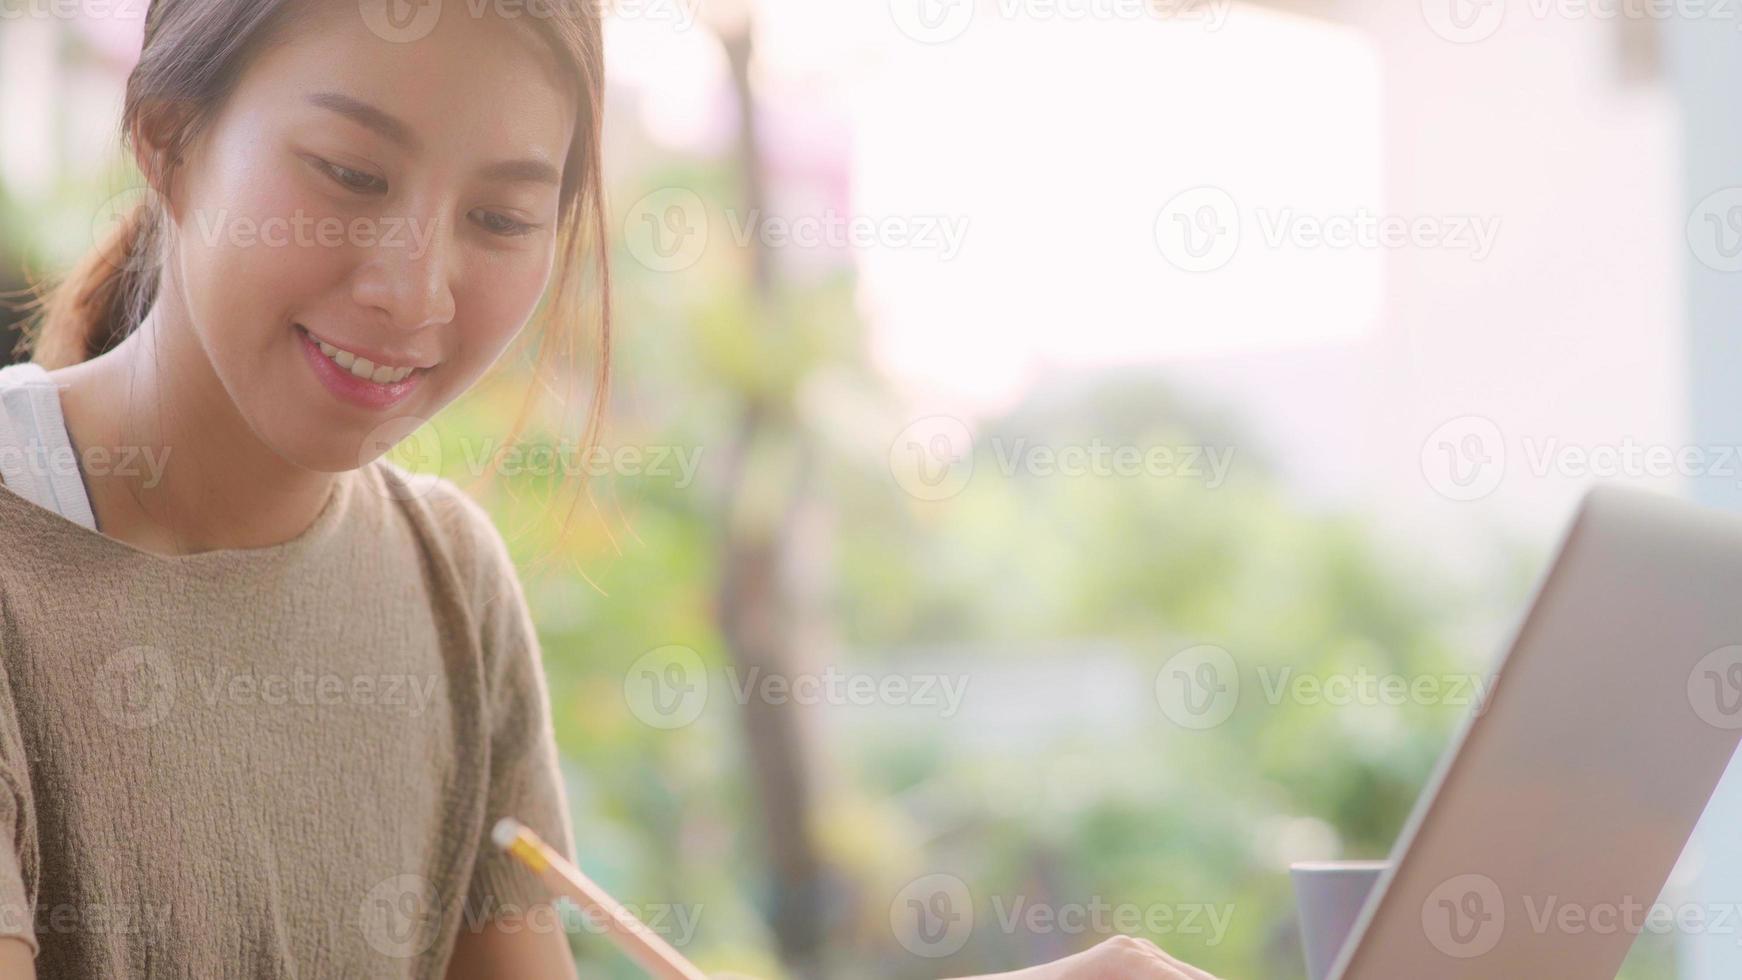 Freelance Asian woman working at home, business female working on laptop sitting on table in the garden in morning. Lifestyle women working at home concept. photo